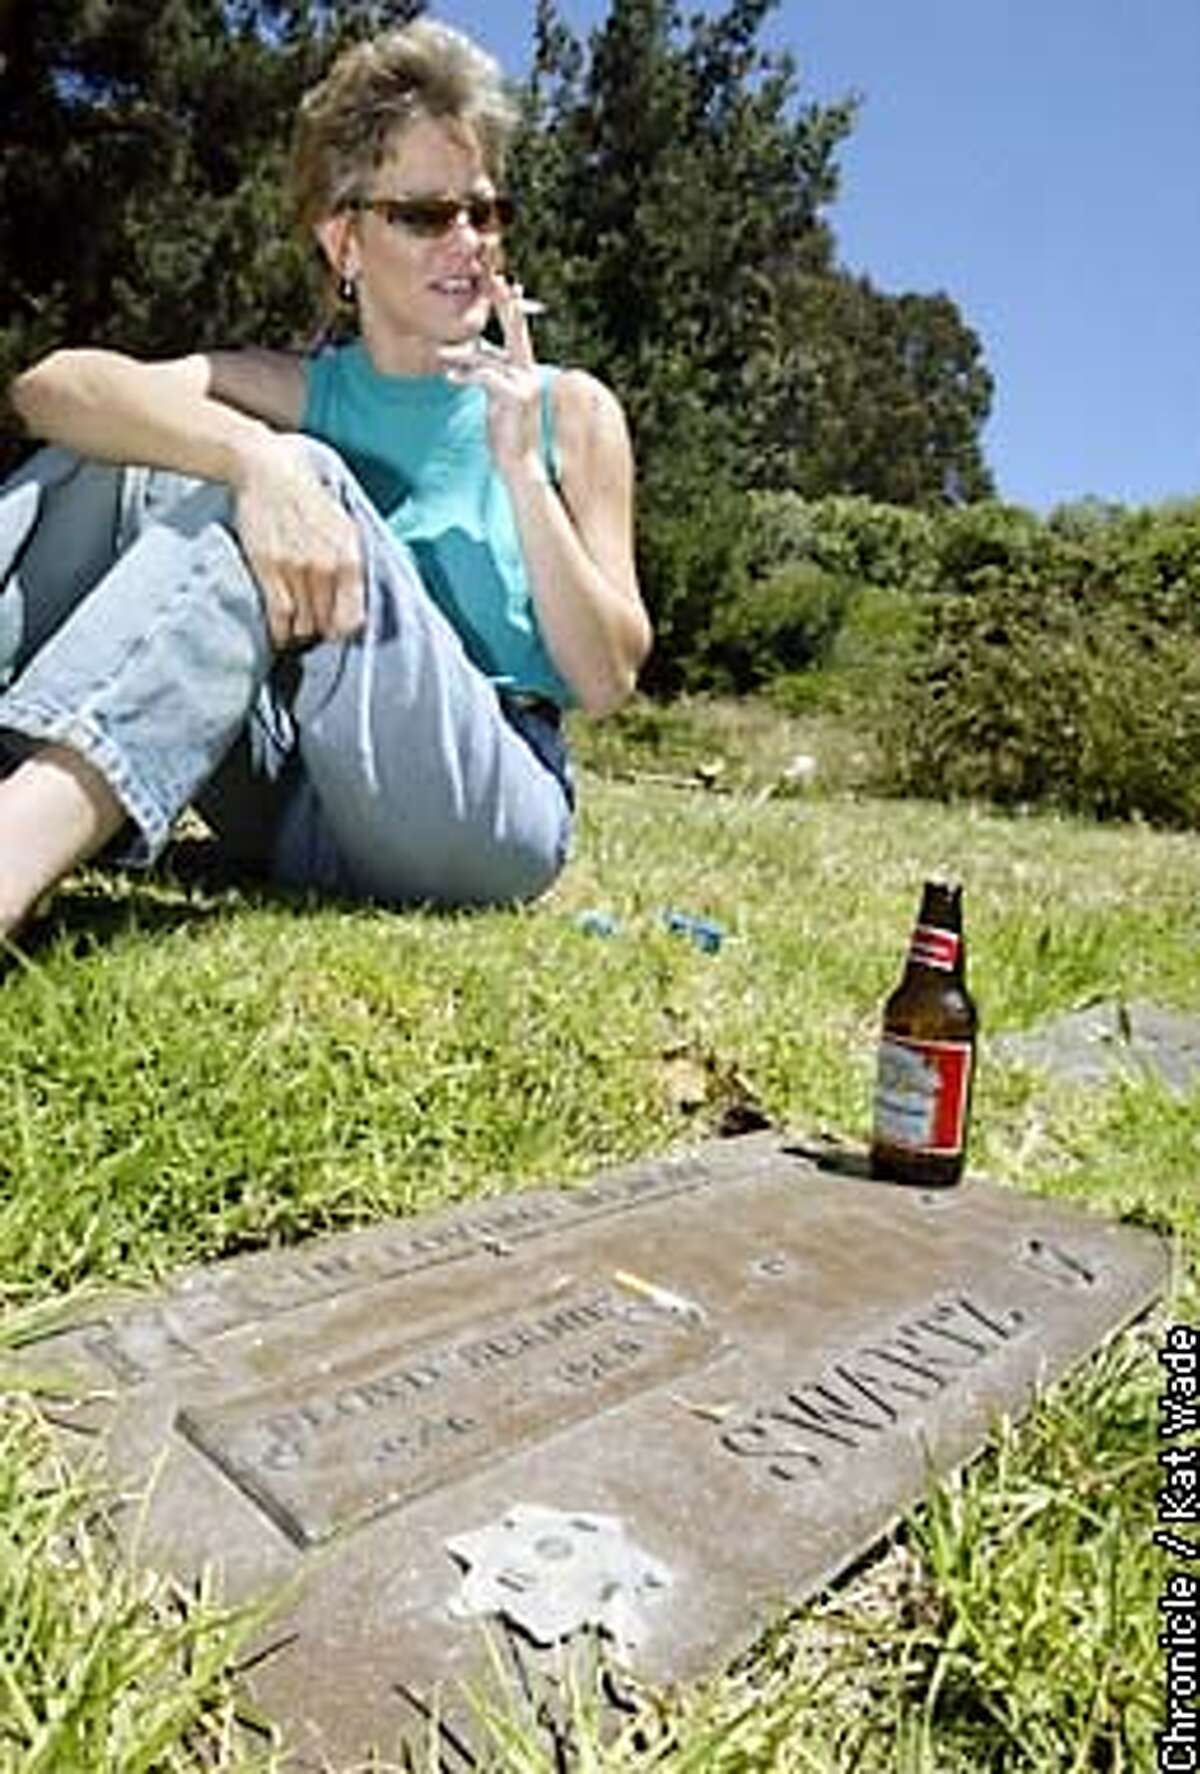 At Rolling Hills Cemetary in Richmond Kim Swartz visits the grave of her deceased husband, Floyd "Bernie" Swartz, a Pinole Police Officer who was killed in the line of duty in 1980 when she was pregnant with Amber. Sharing a beer and cigarette with Bernie she always promises him that she will find his daughter who disappeared in 1988. SAN FRANCISCO CHRONICLE PHOTO BY KAT WADE